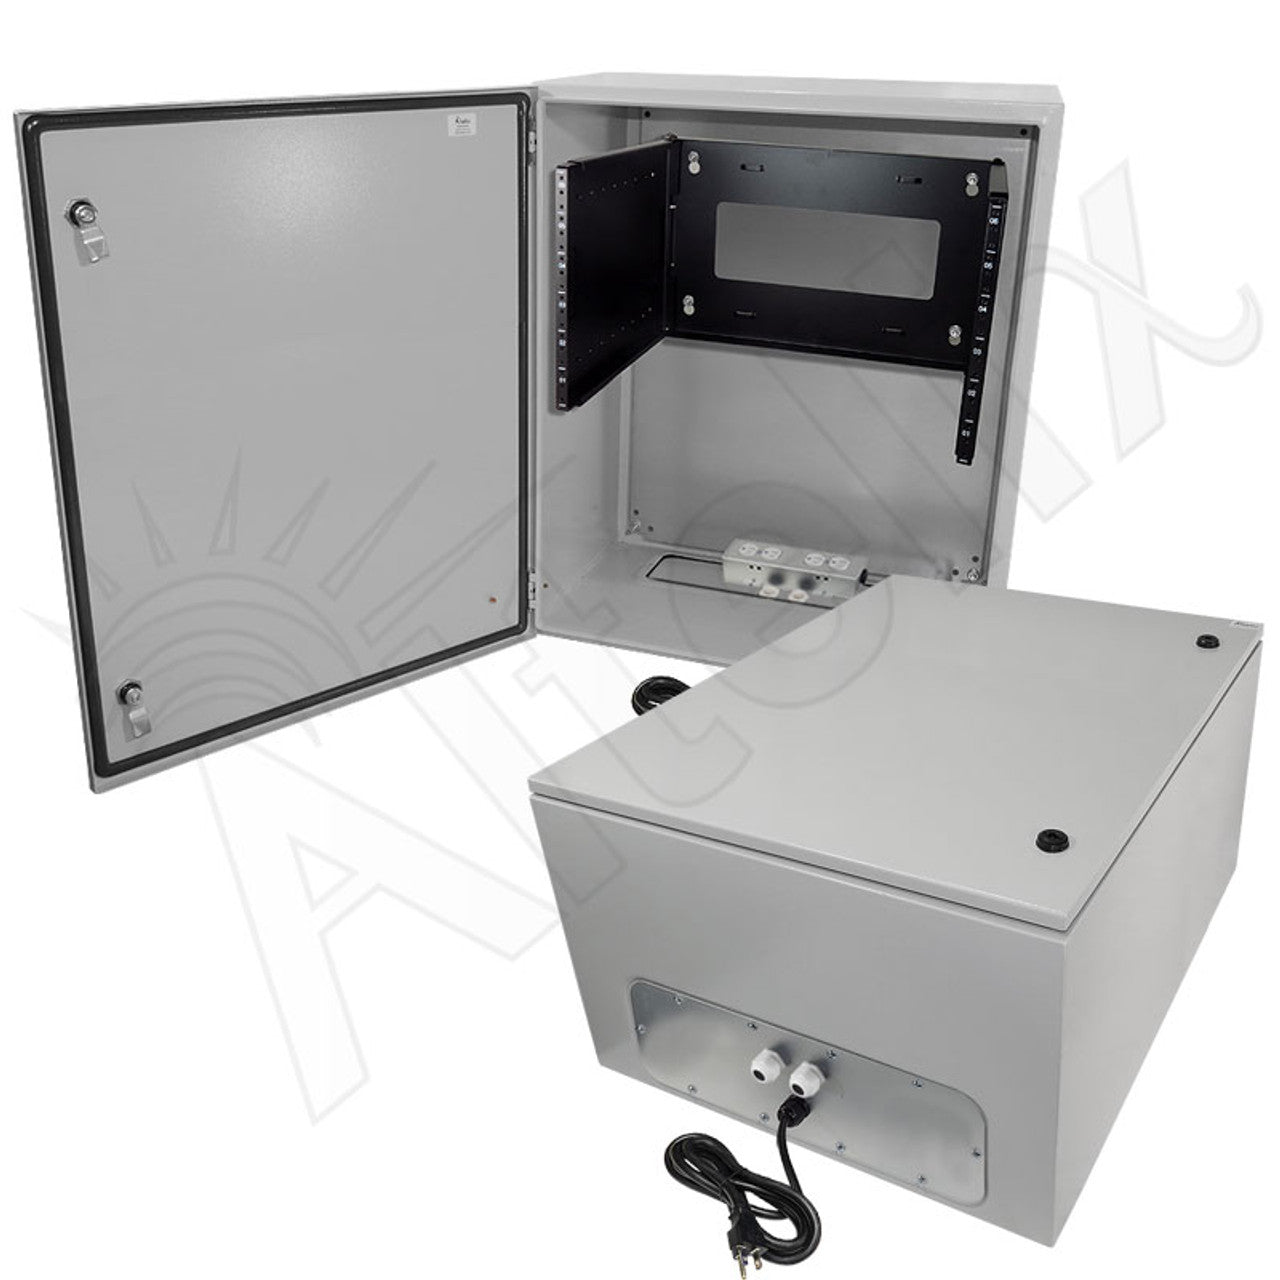 Altelix 120VAC 20A Steel NEMA 4X Enclosure for UPS Power Systems with 19" Wide 6U Rack, 20A Power Outlets and Power Cord-5